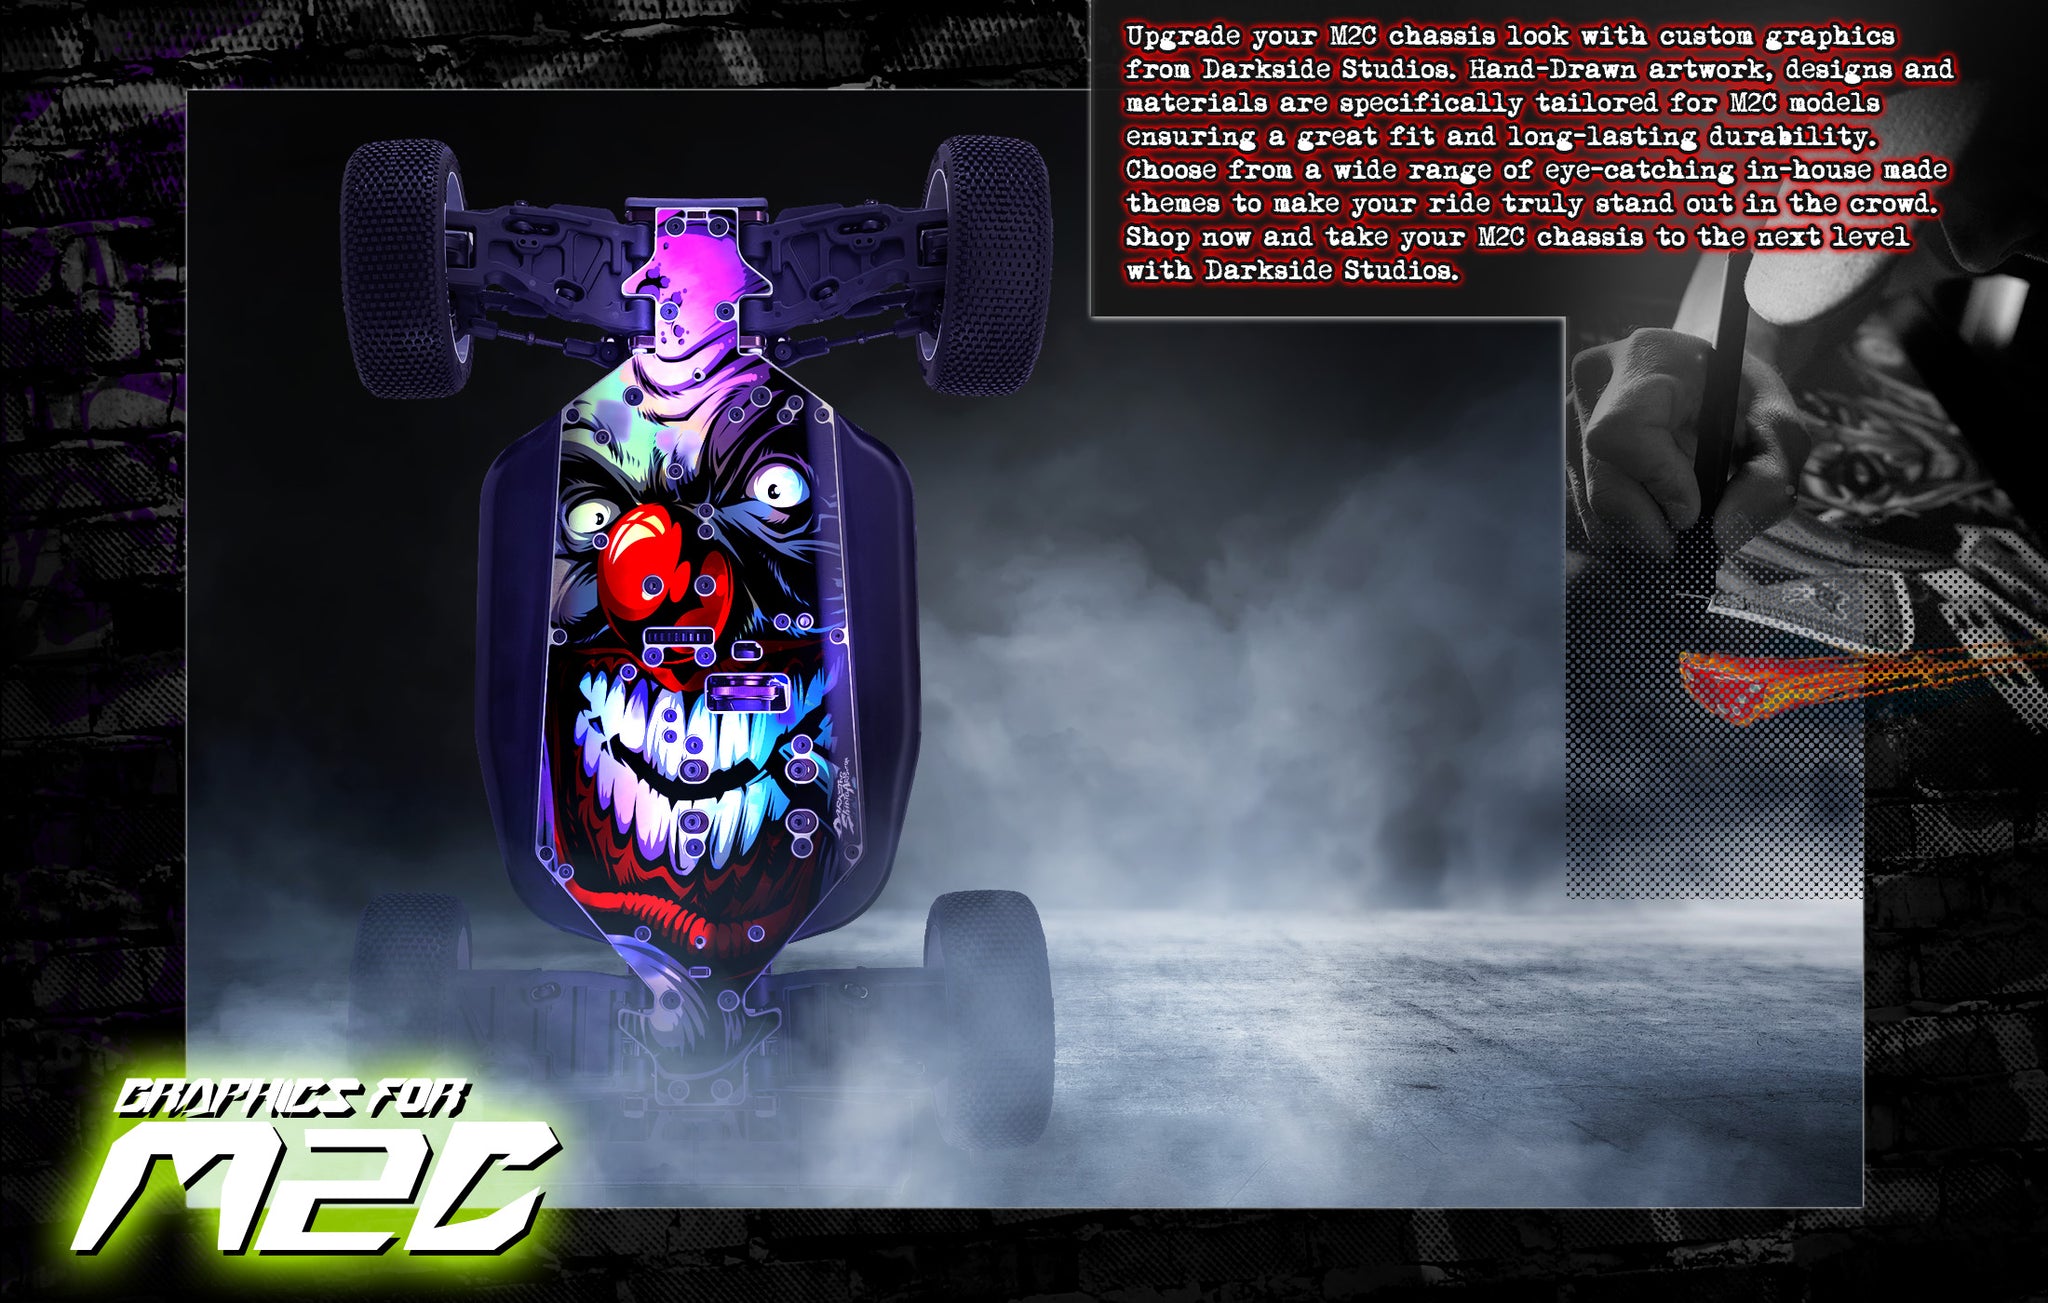 Add a touch of style and personality to your M2C chassis with Darkside Studio Arts LLC's chassis skin protective graphics.